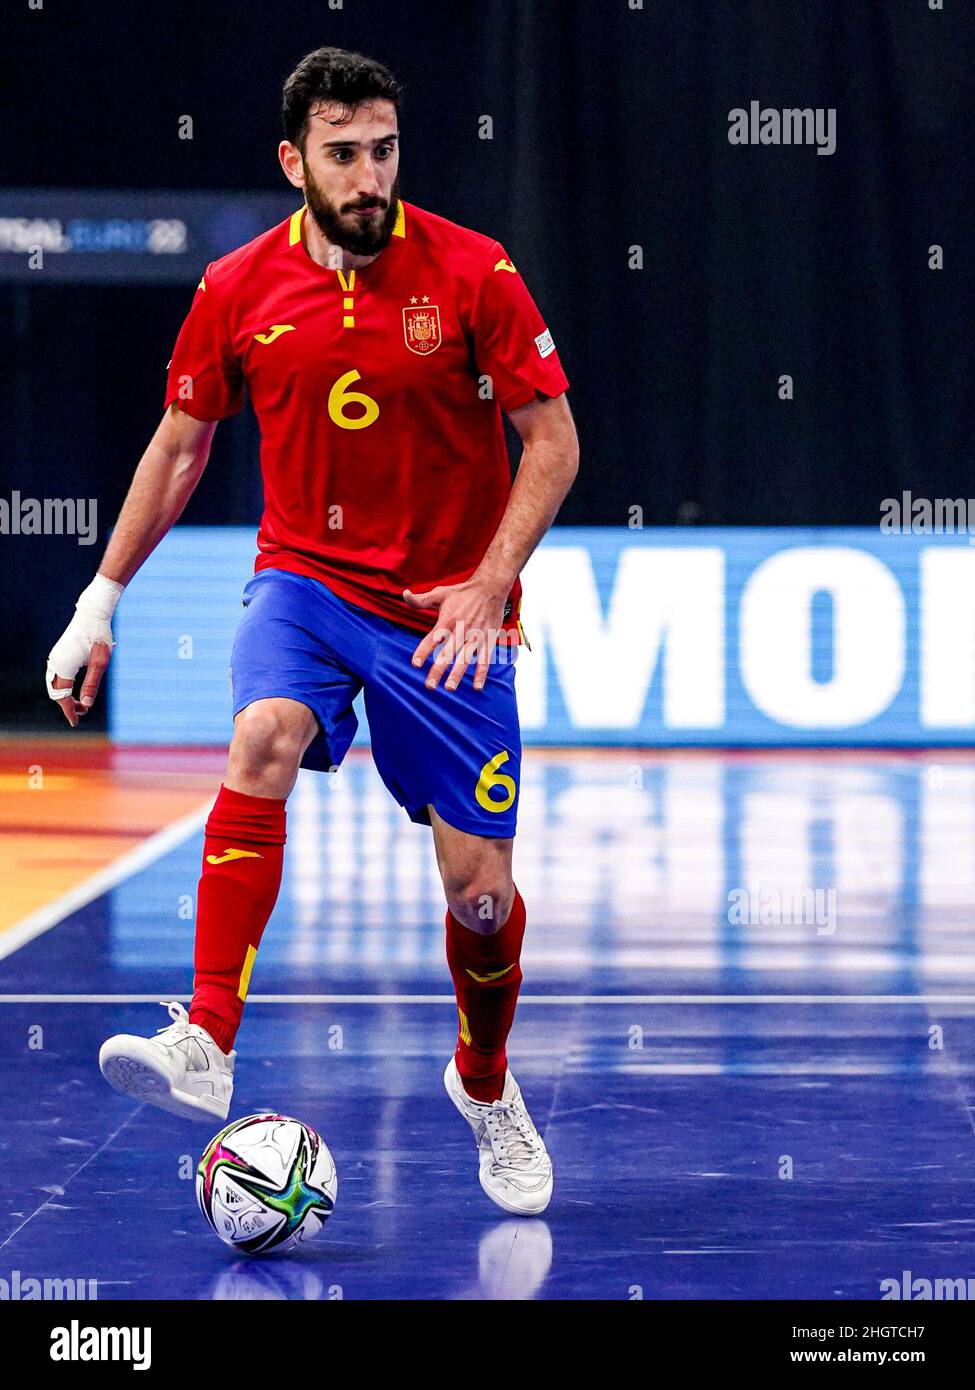 GRONINGEN, NETHERLANDS - JANUARY 22: Raul Gomez of Spain during the Men's Futsal Euro 2022 Group D match between Spain and the Bosnia and Herzegovina at the Martiniplaza on January 22, 2022 in Groningen, Netherlands (Photo by Andre Weening/Orange Pictures) Stock Photo